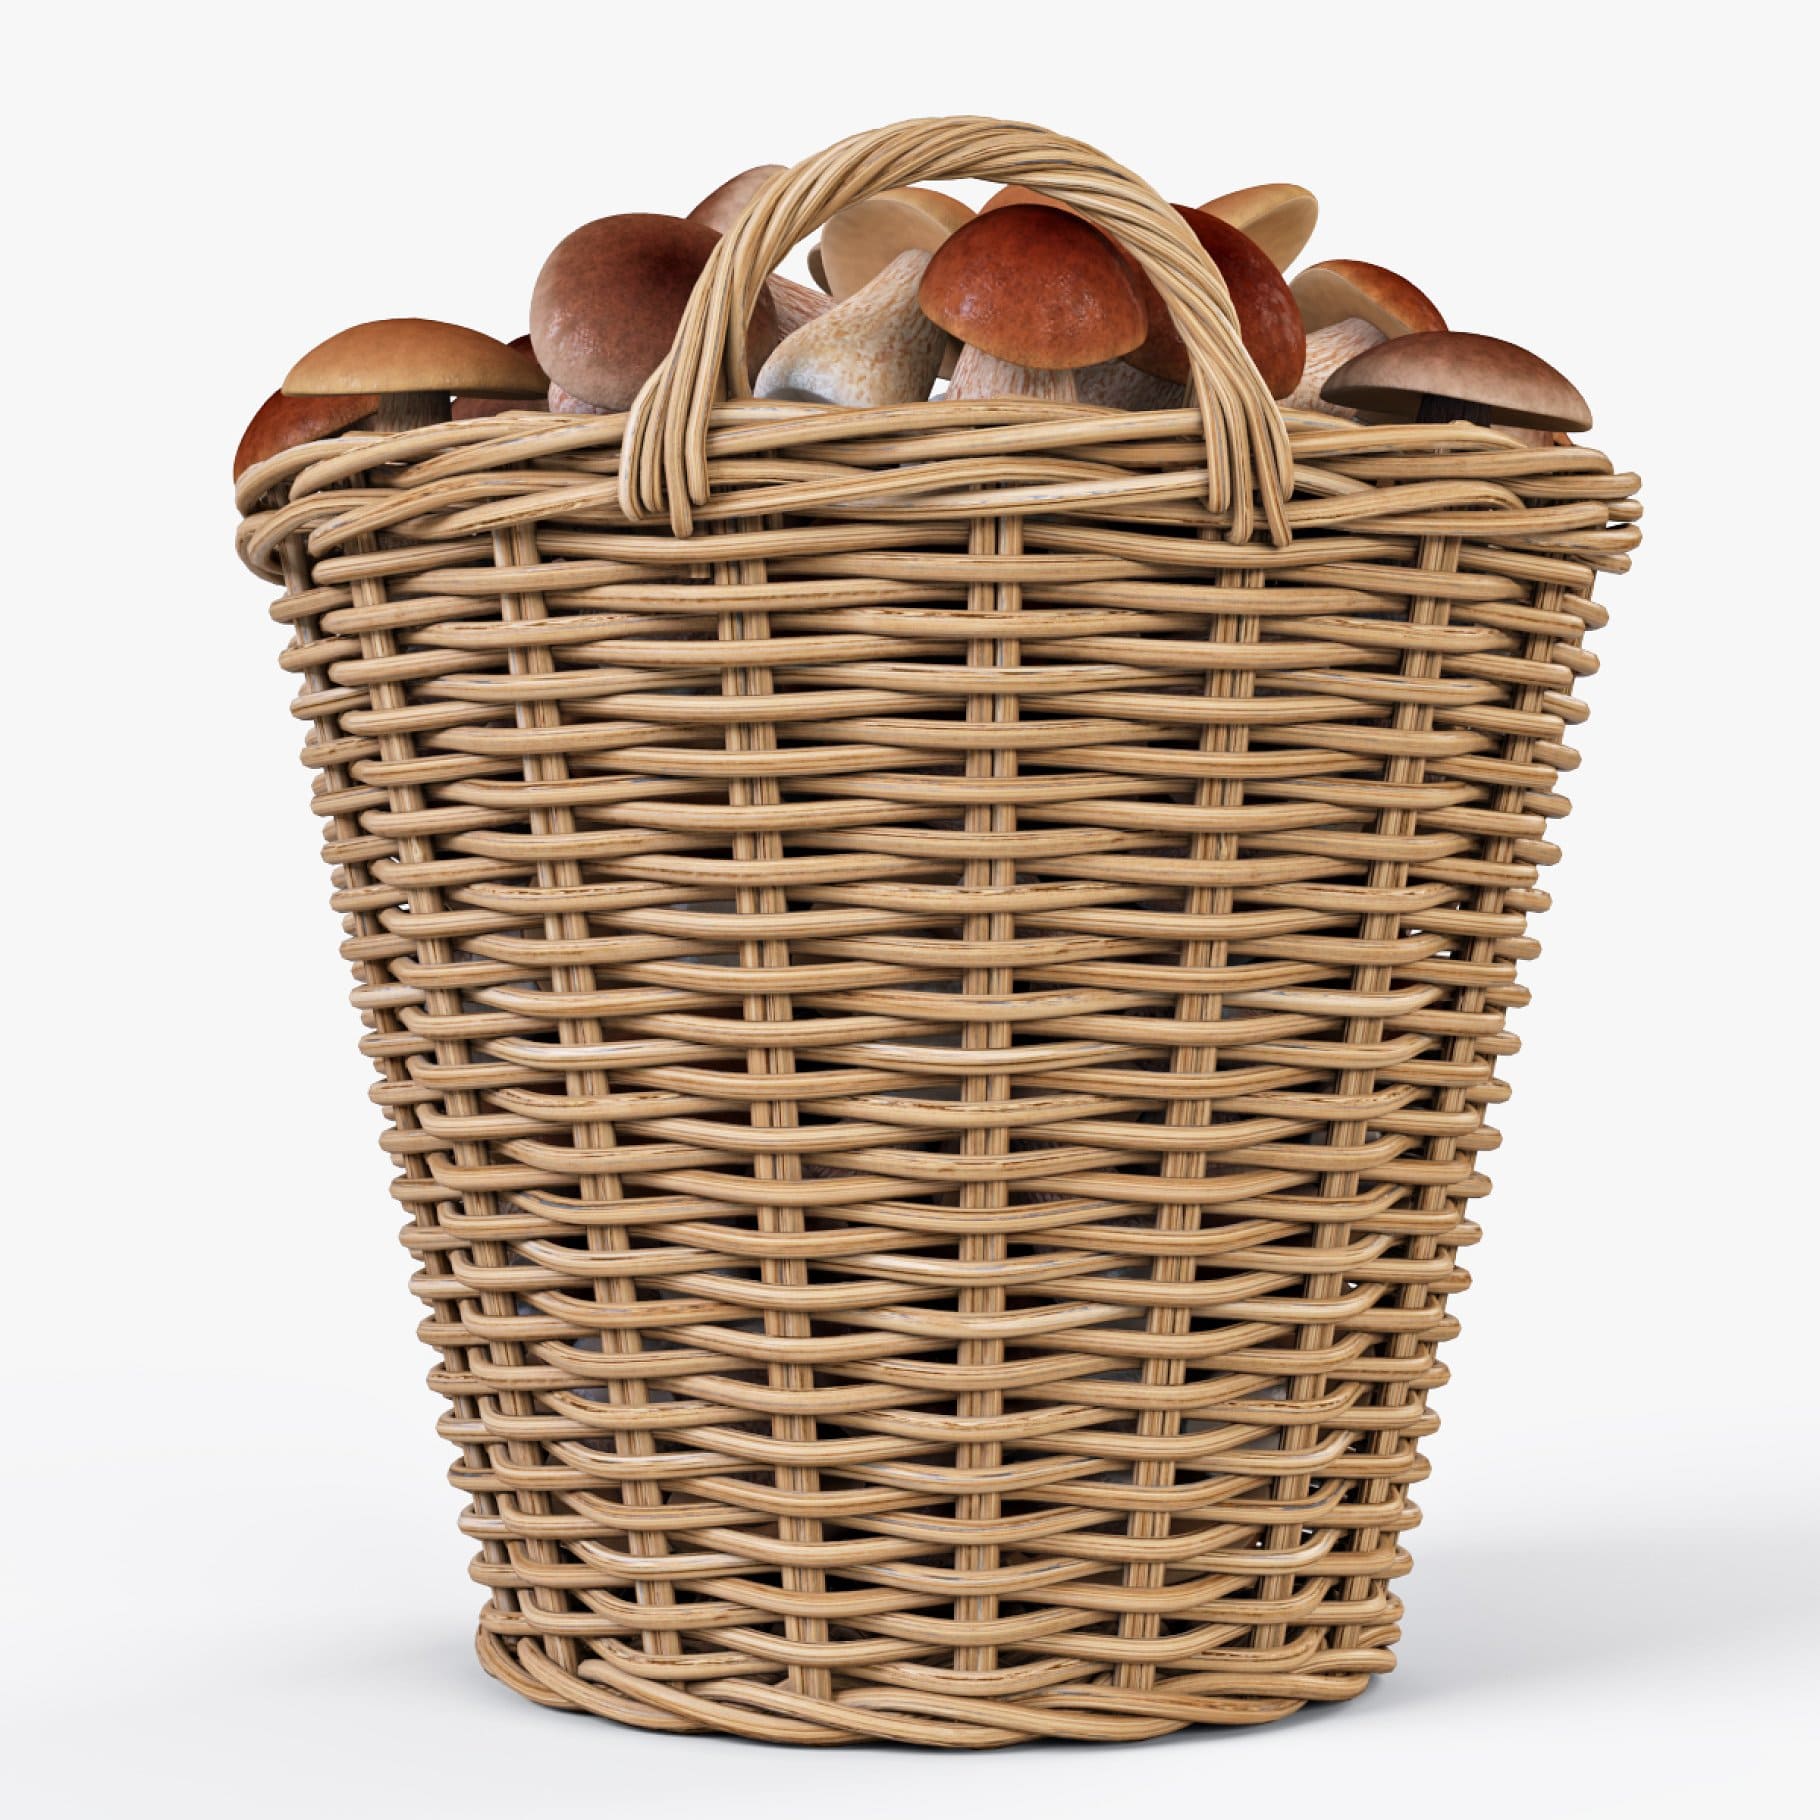 A tightly woven basket for mushrooms.